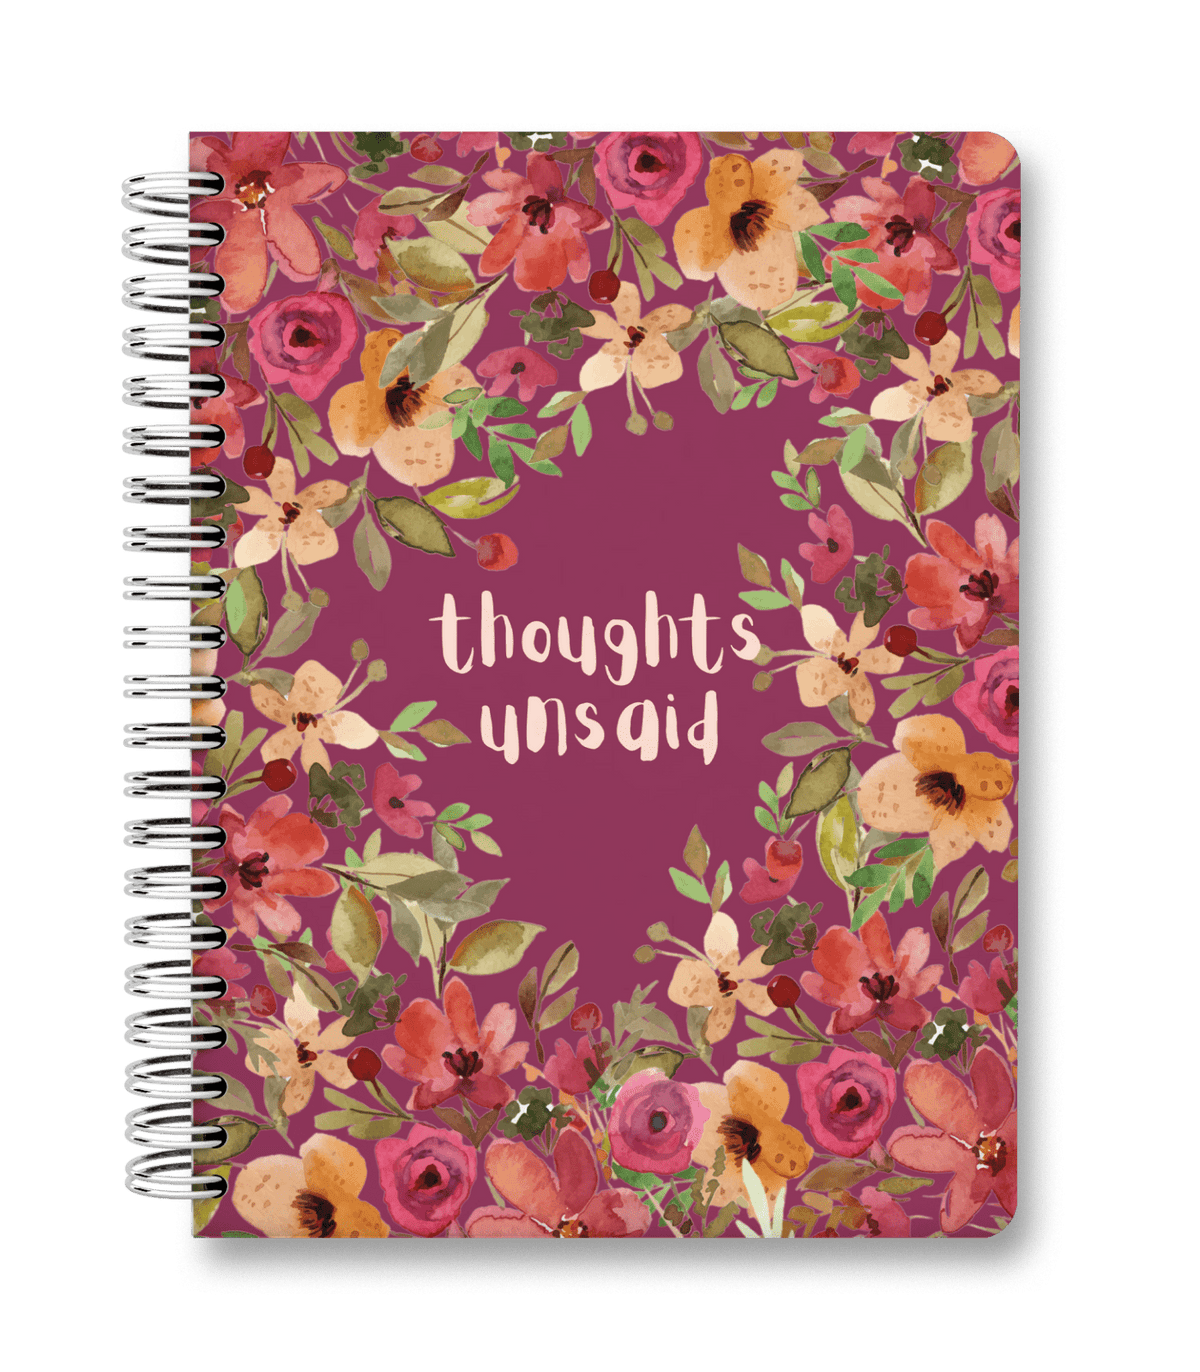 Thoughts Unsaid - Spiral Hardcover Journal